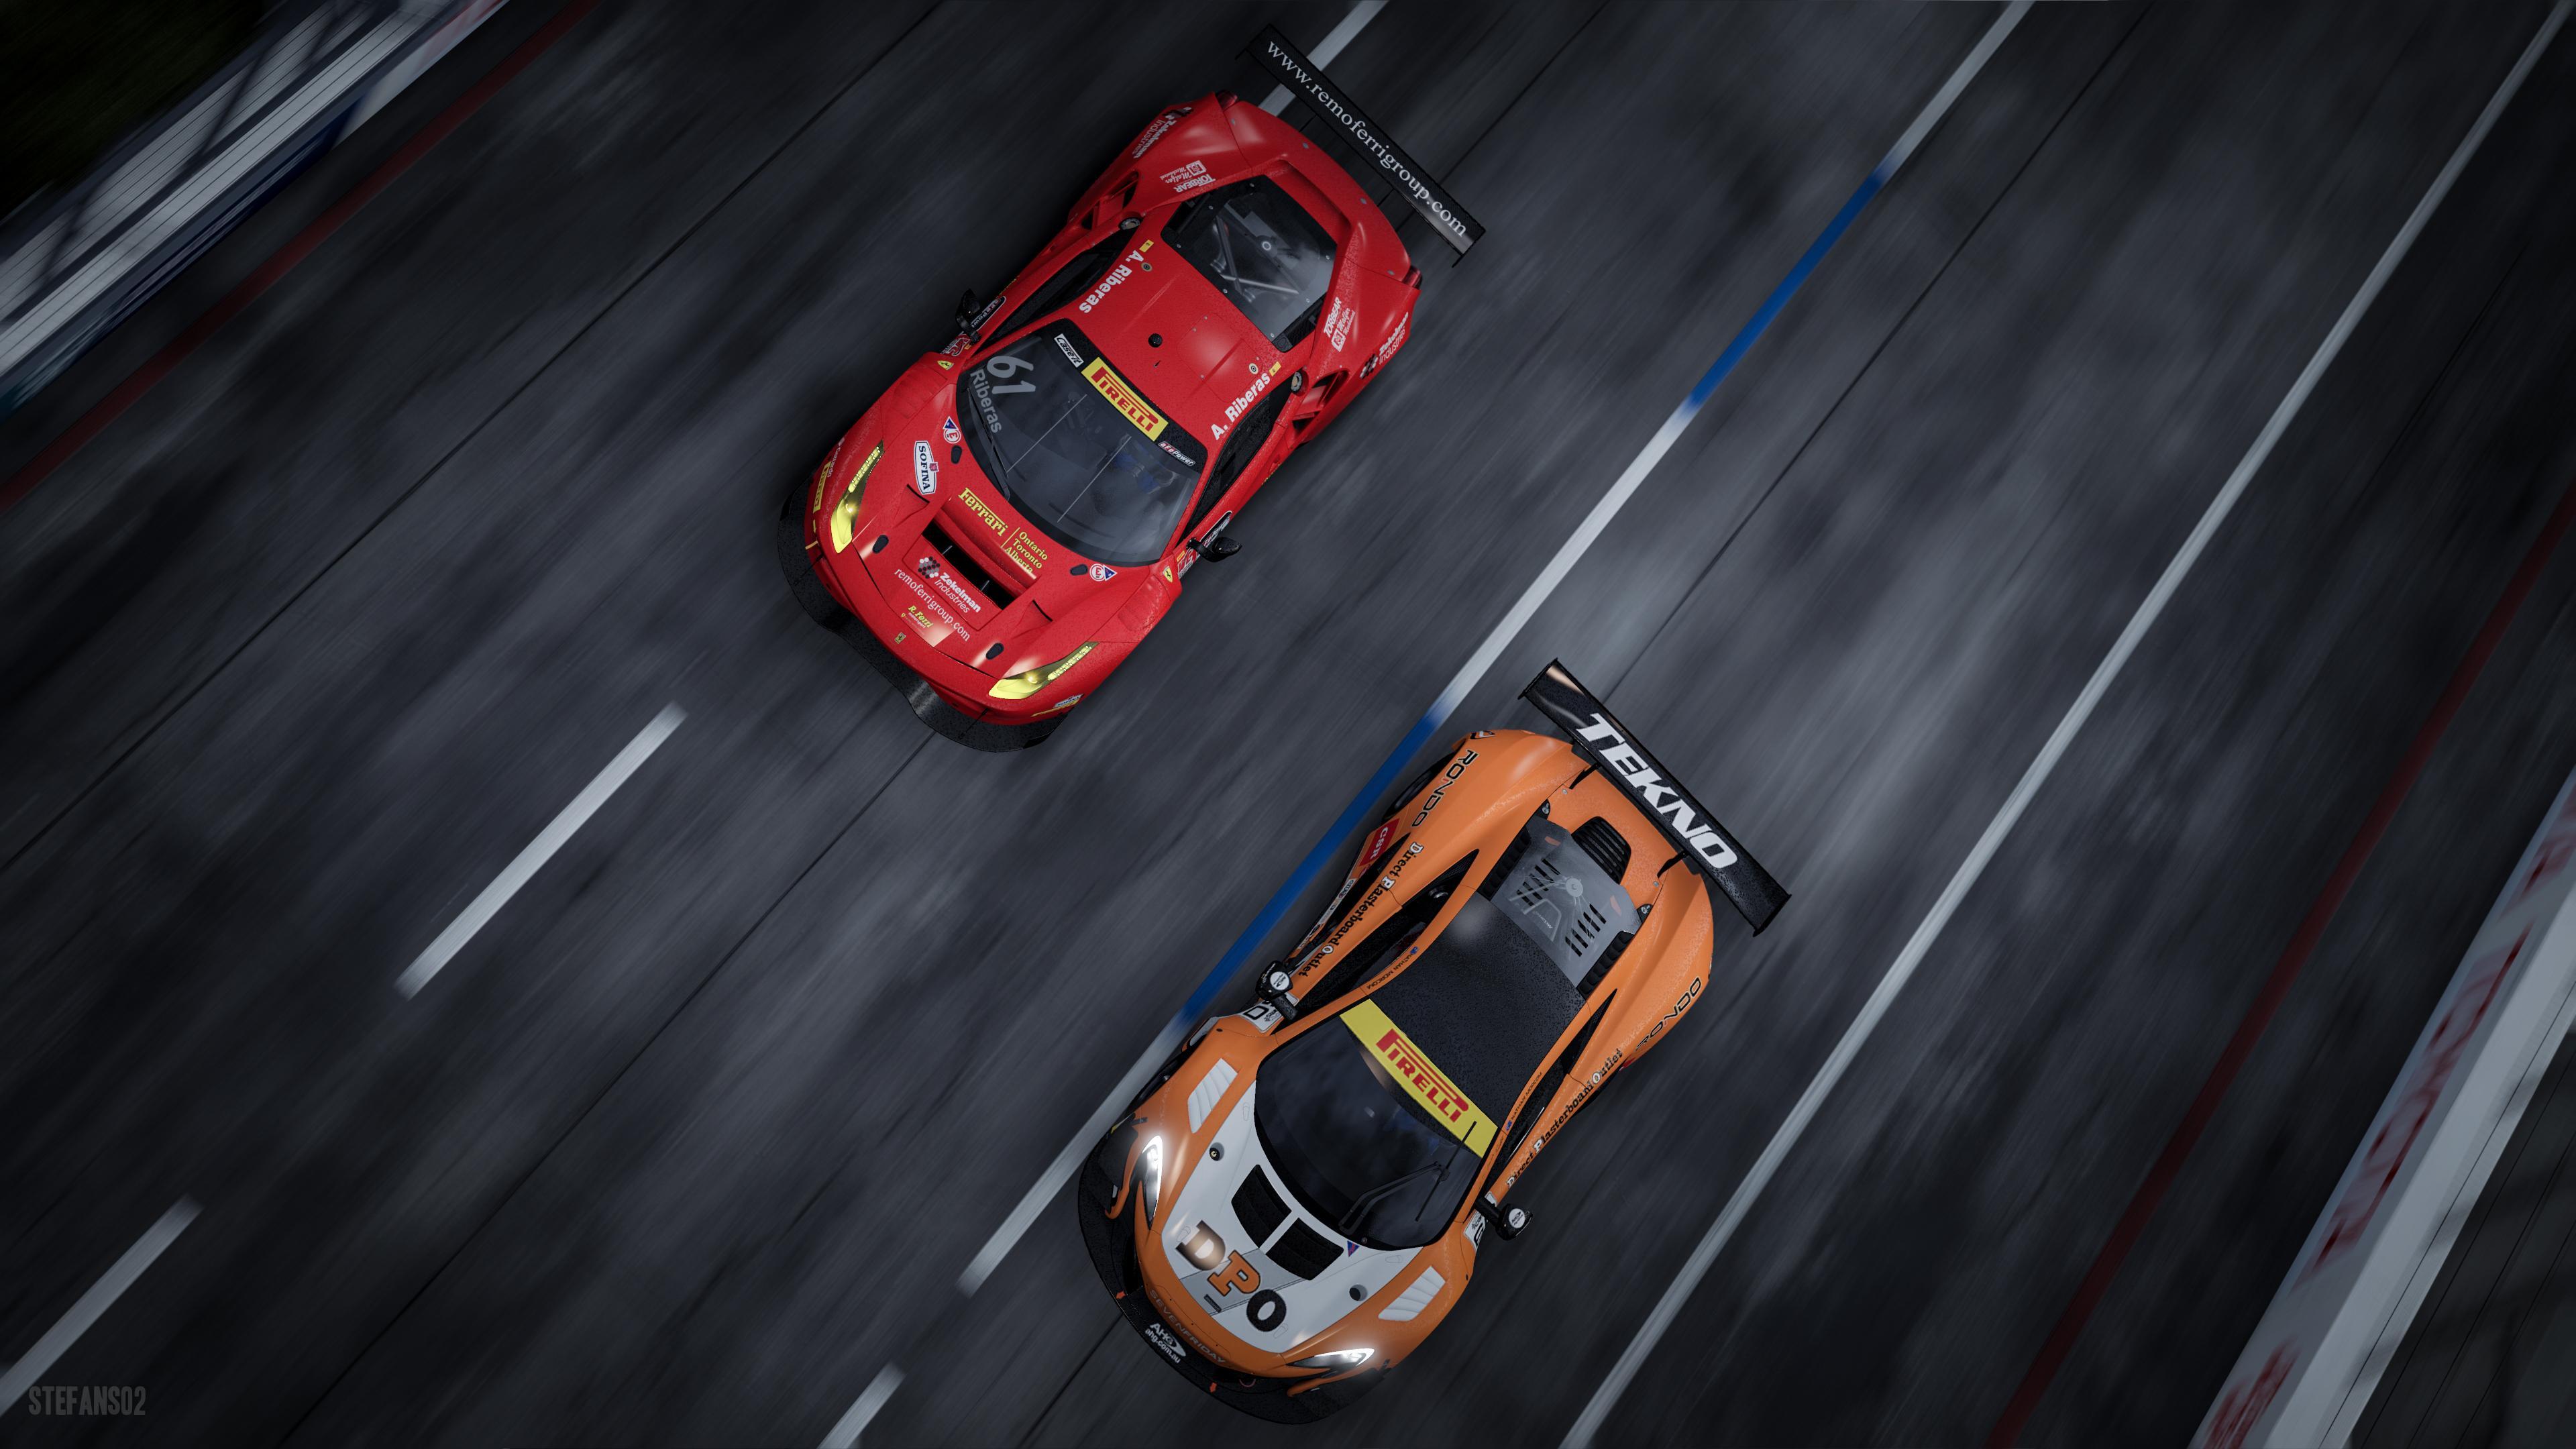 4k Project CARS HD Games, 4k Wallpaper, Image, Background